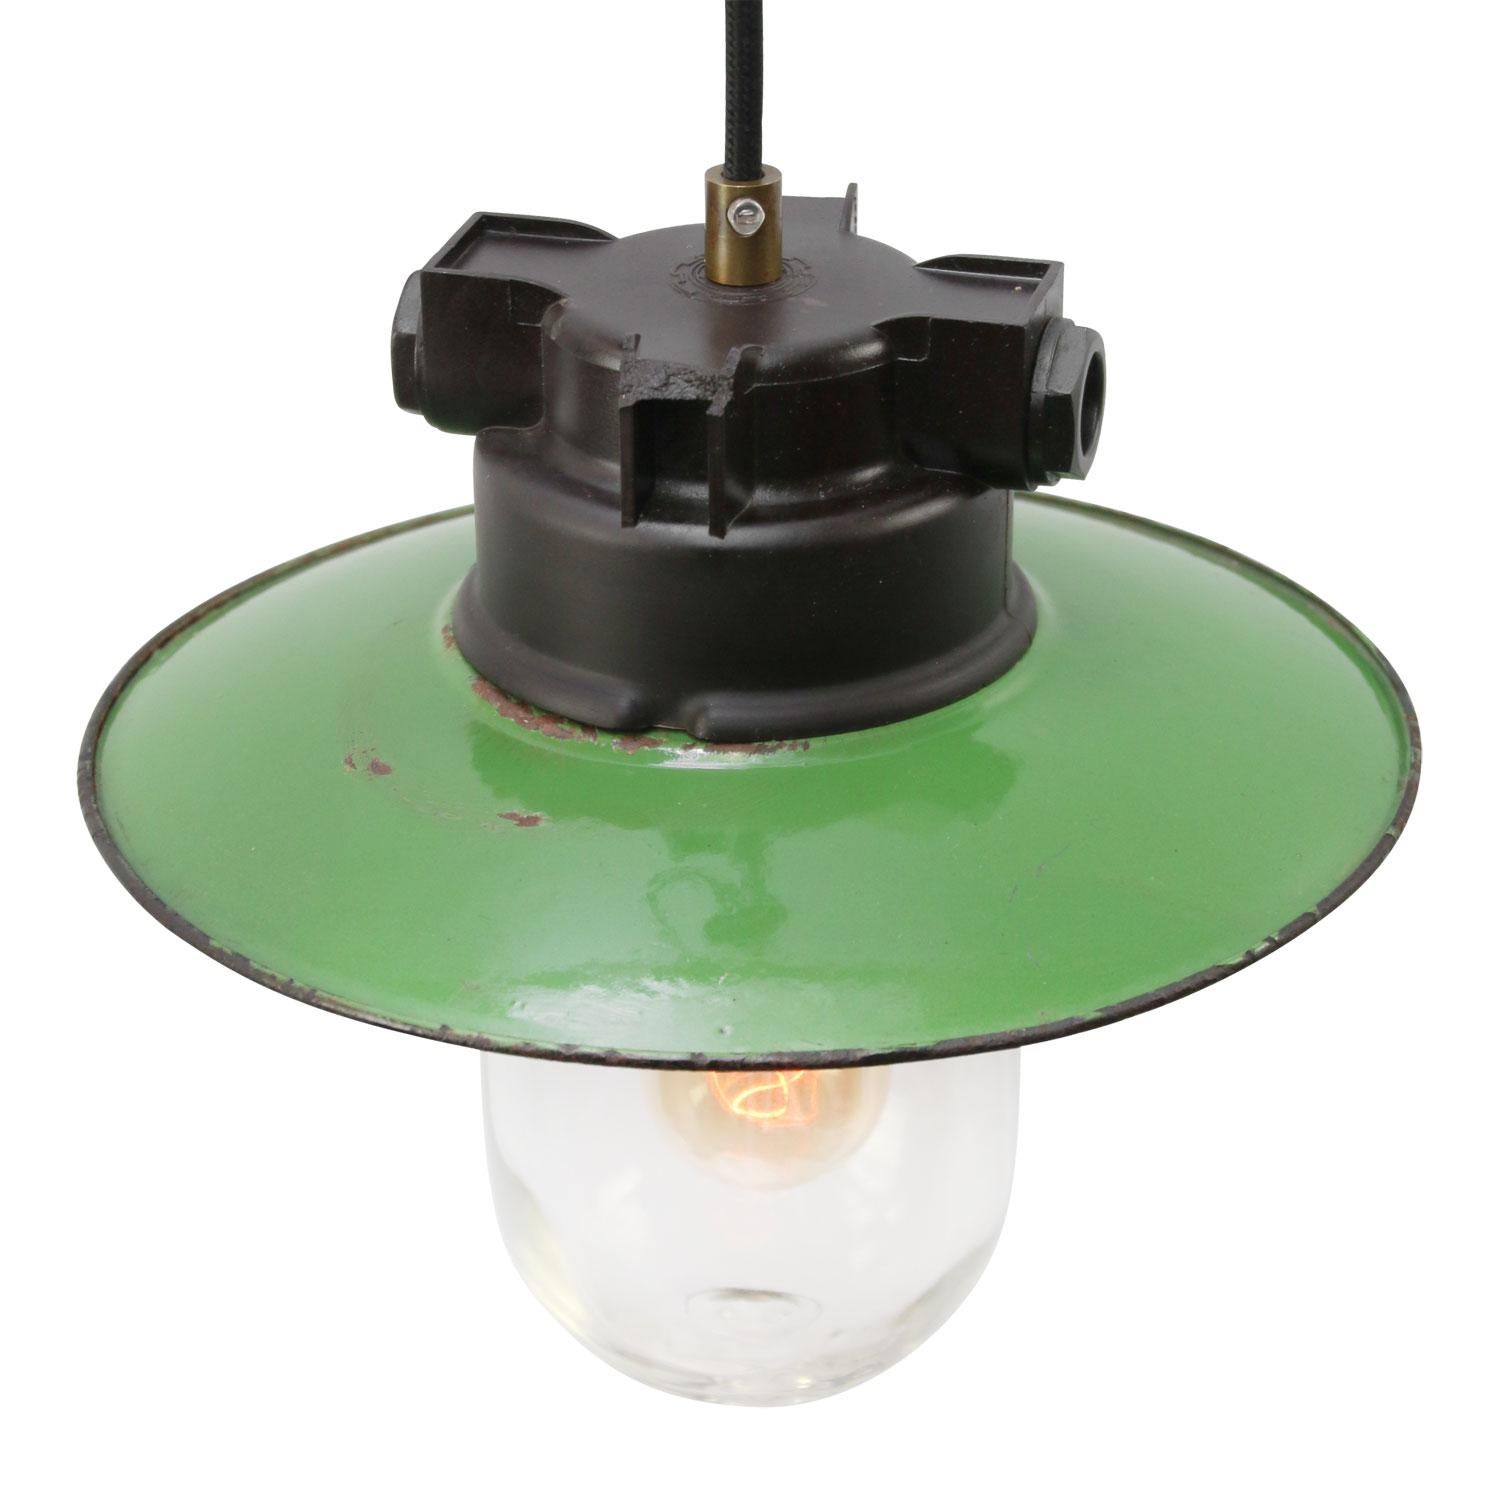 Bakelite industrial hanging lamp.
Green Enamel shade and clear glass.

Weight: 1.40 kg / 3.1 lb

Priced per individual item. All lamps have been made suitable by international standards for incandescent light bulbs, energy-efficient and LED